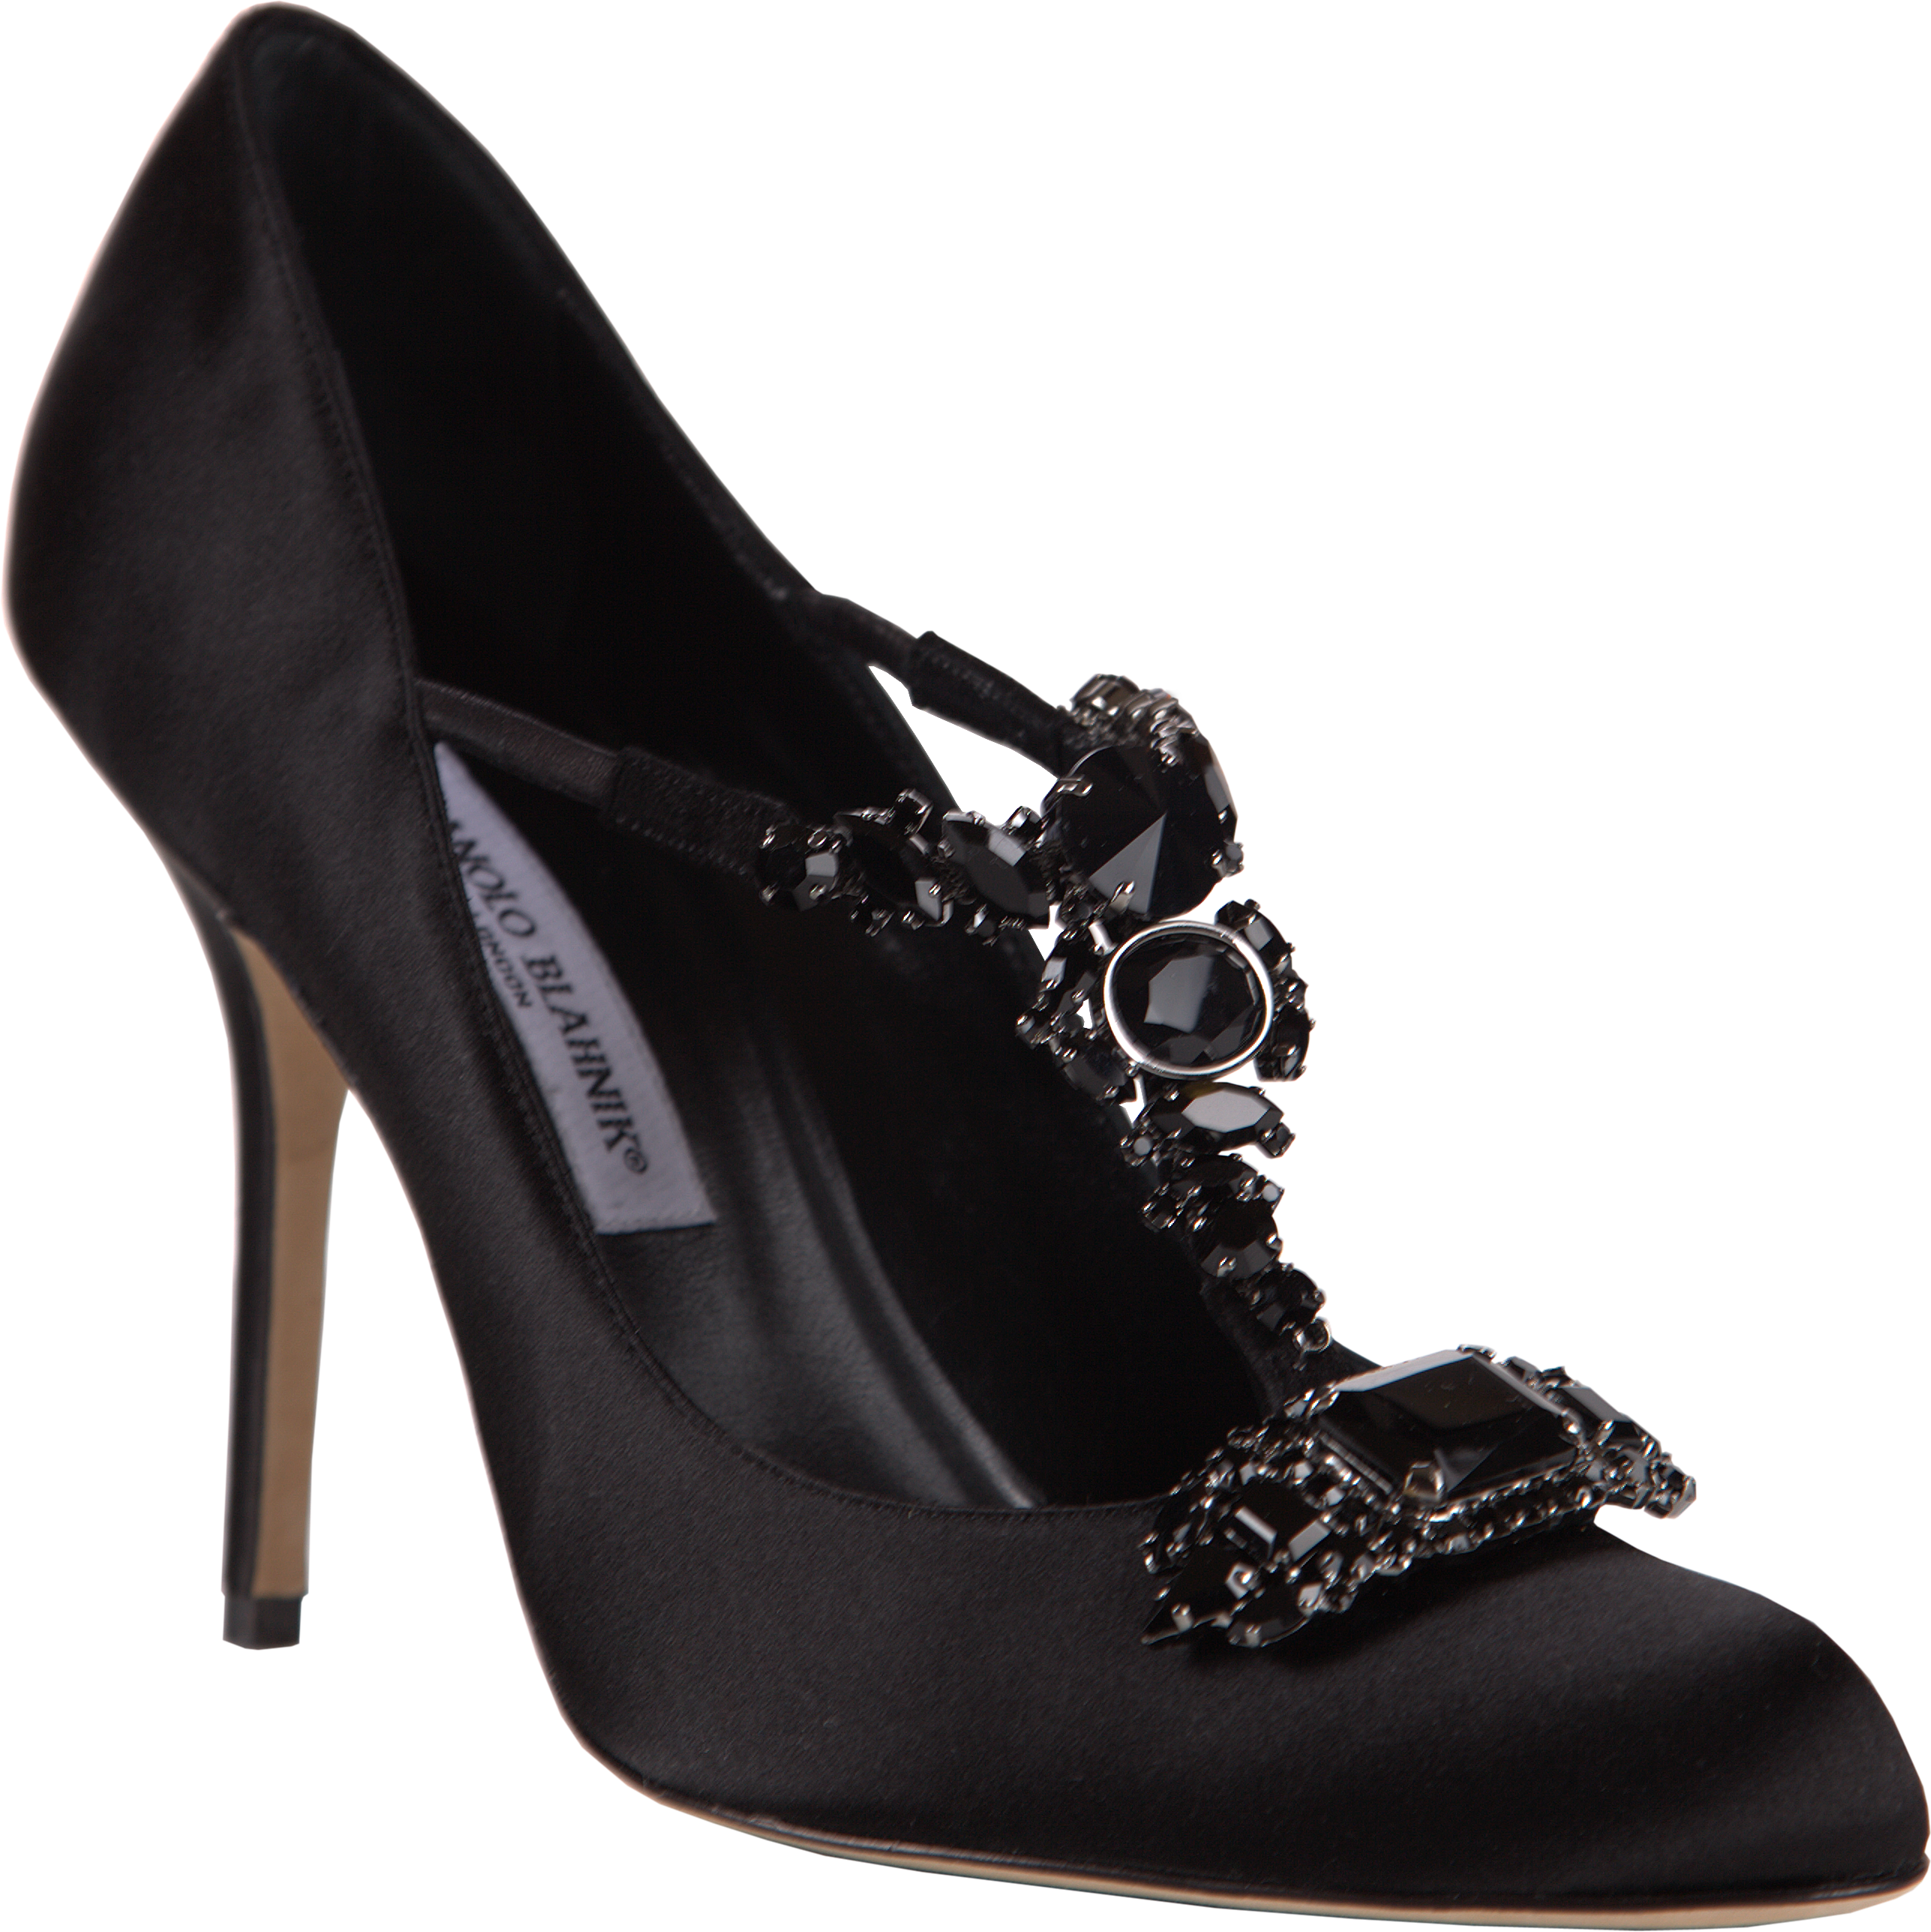 women shoes png images are available for download crazypngm crazy png images #29923